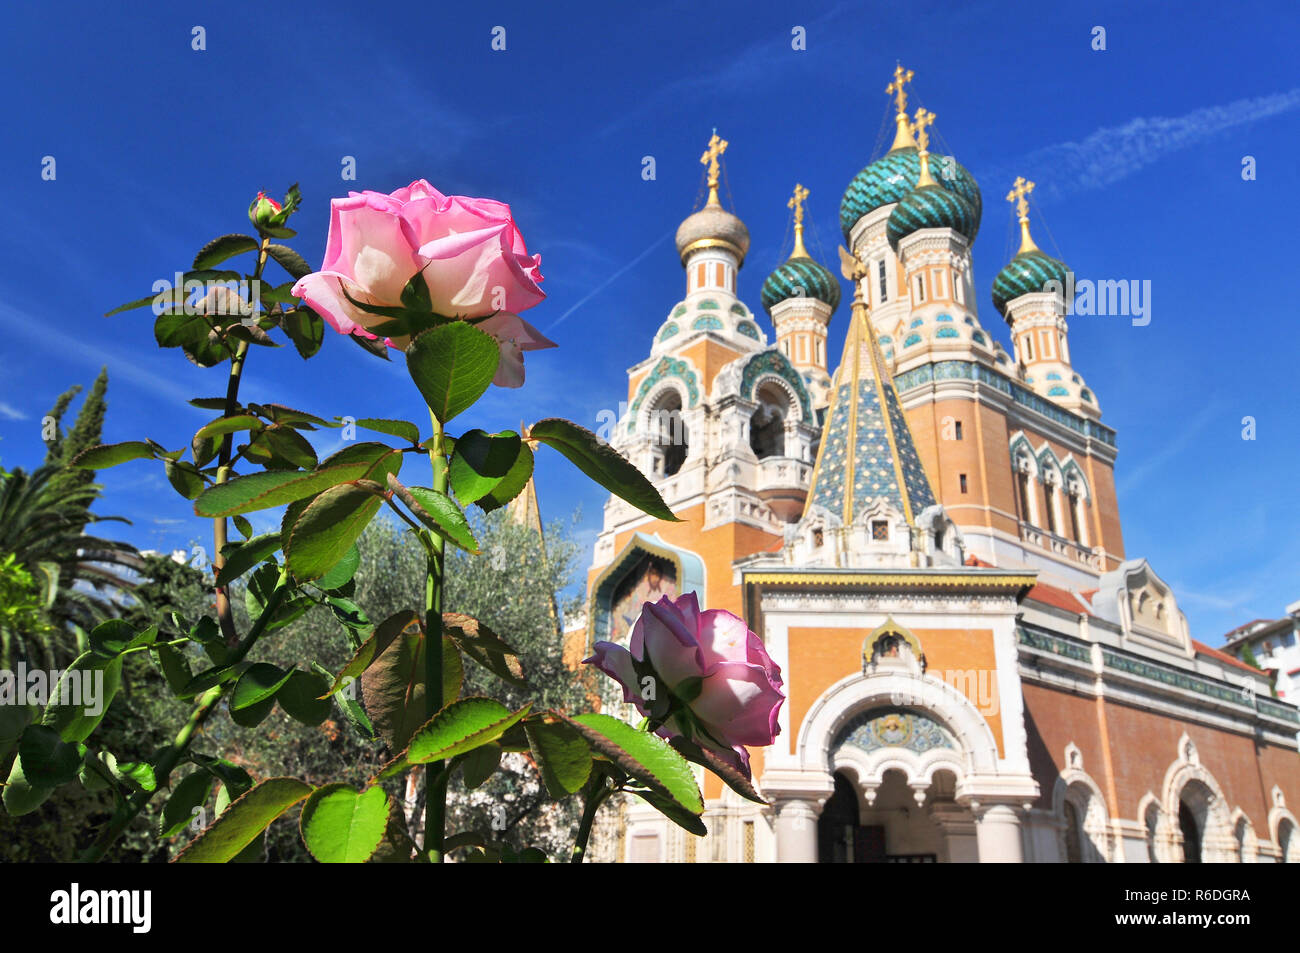 The Russian Orthodox Cathedral In Nice Cathédrale Orthodoxe Russe Saint-Nicolas De Nice Stock Photo